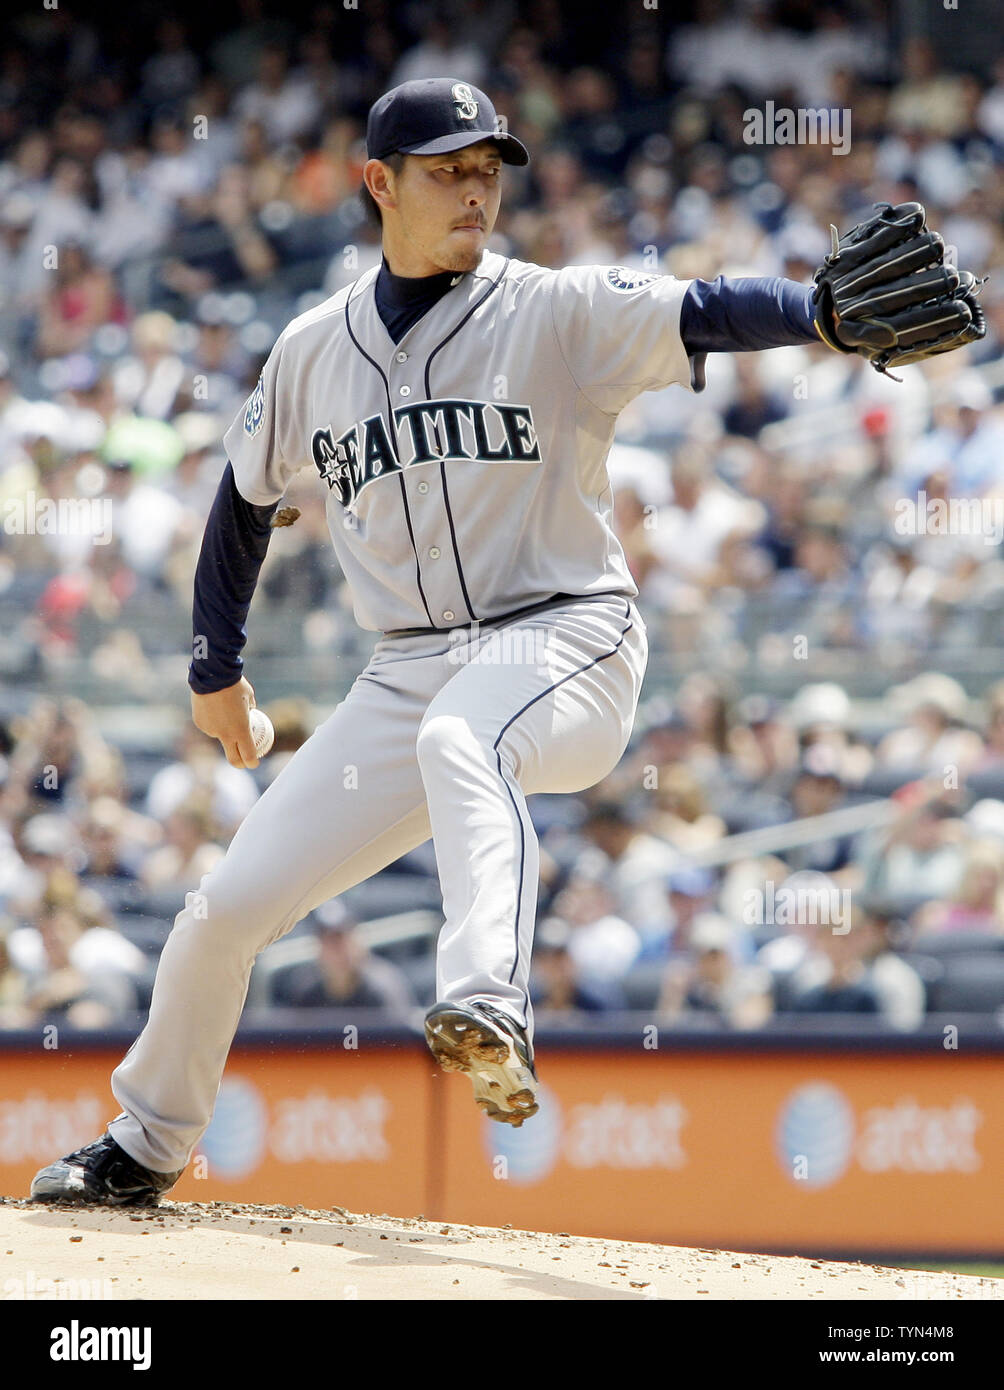 Seattle Mariners starting pitcher Hisashi Iwakuma throws a pitch in the first inning against the New York Yankees at Yankee Stadium in New York City on August 5, 2012.     UPI/John Angelillo Stock Photo